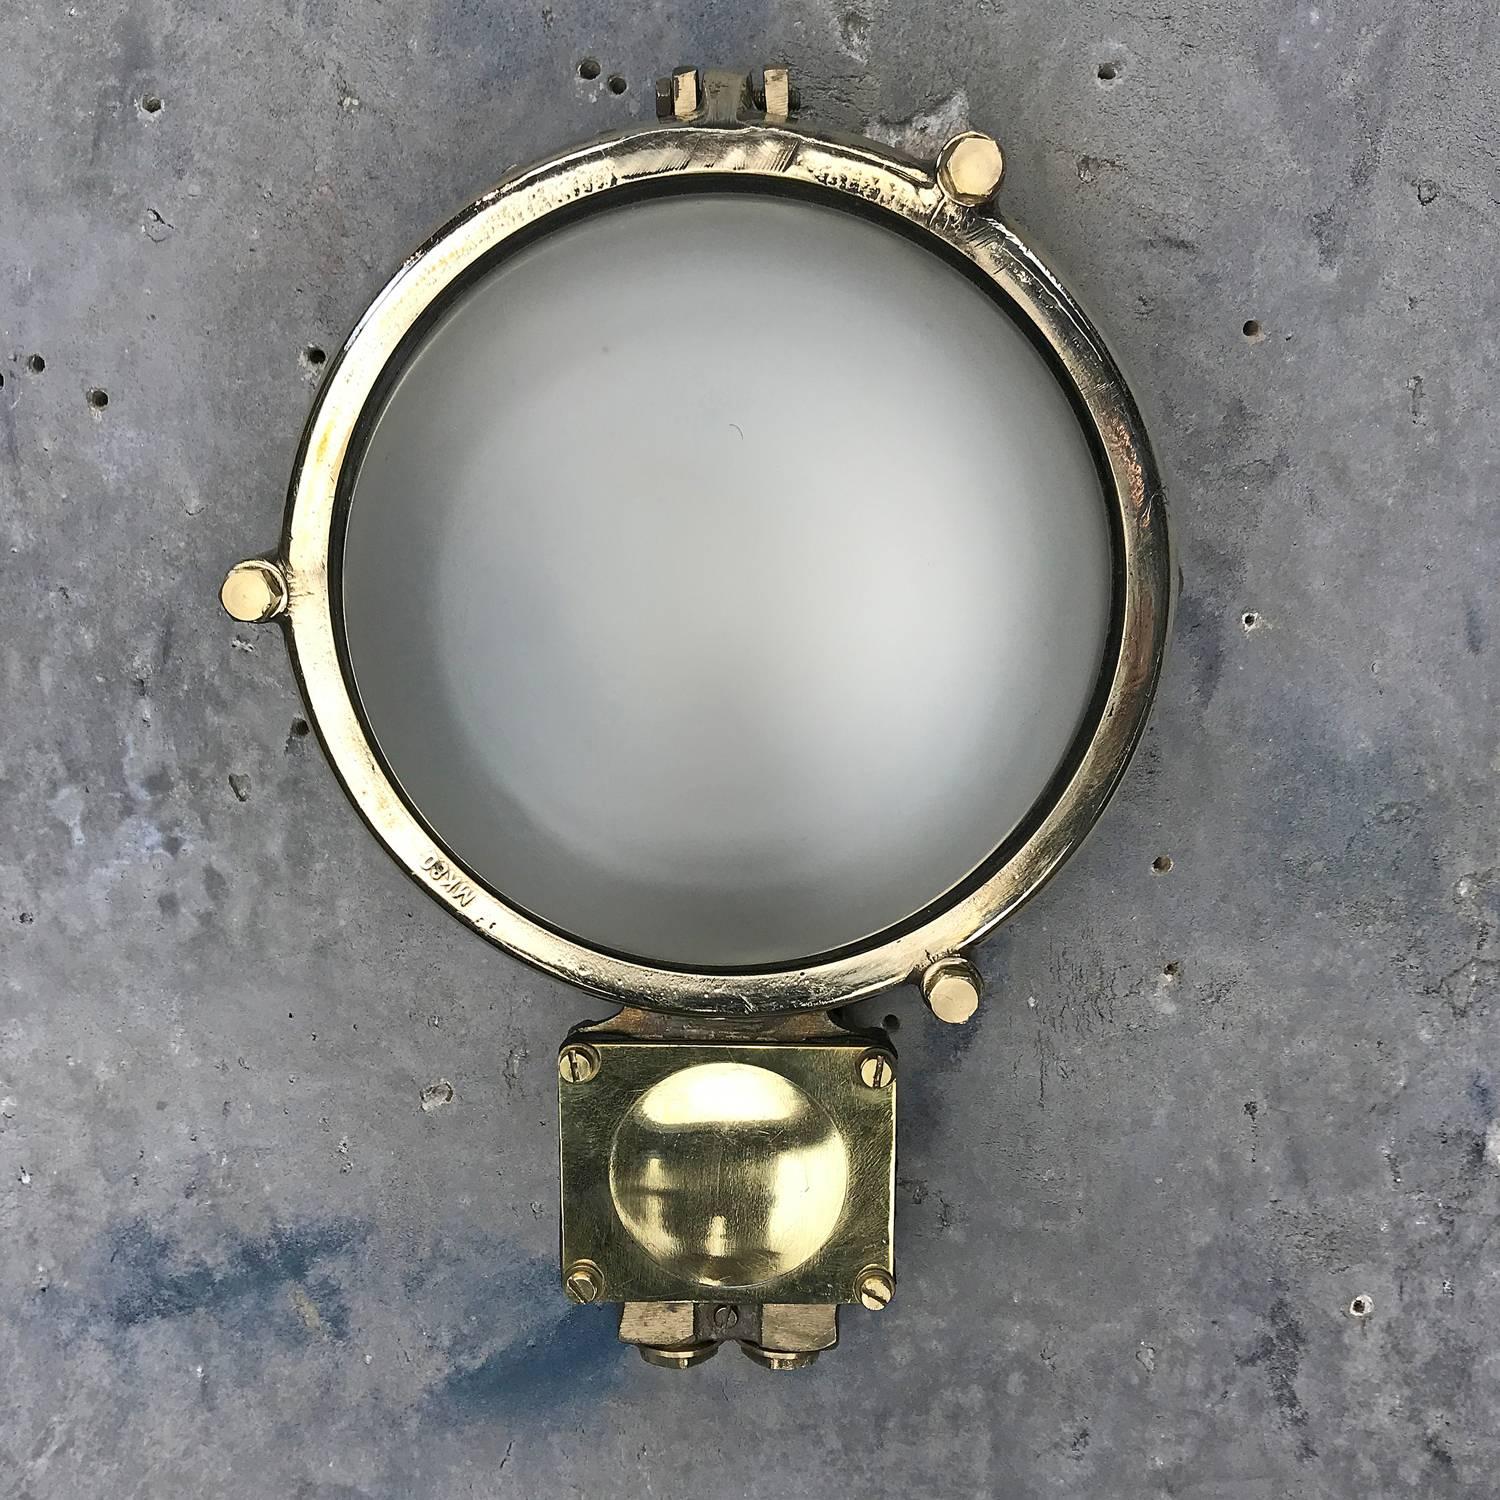 Reclaimed from cargo ships built during the 1970's these are substantial examples of bulkhead lighting with a soft / diffused light output which illuminate an area without casting shadows.

The main body of the light is cast brass with a frosted